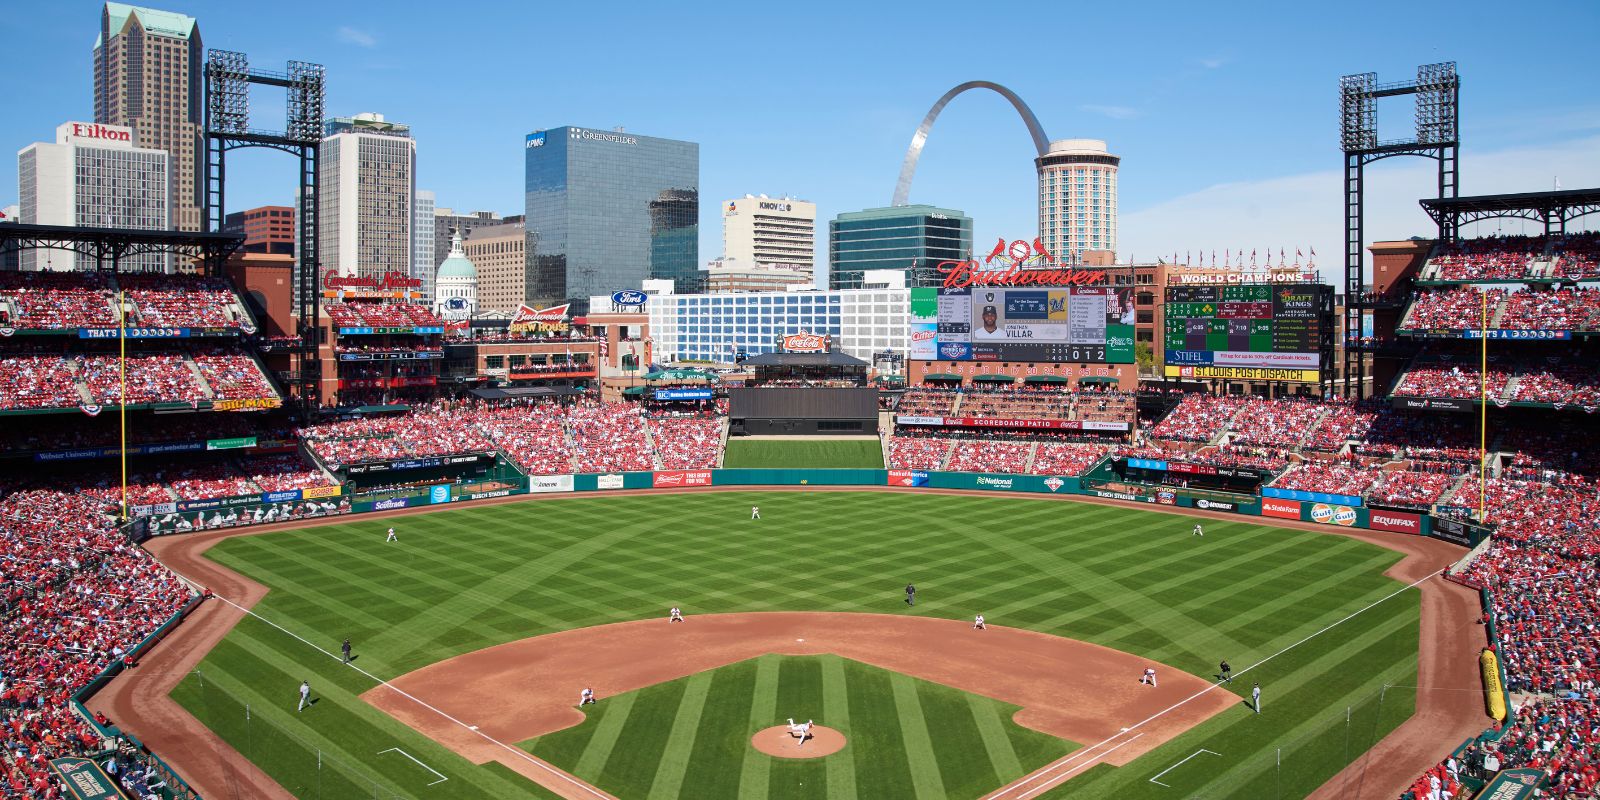 Teams like the St. Louis Cardinals give sports fans something to cheer about all year long.